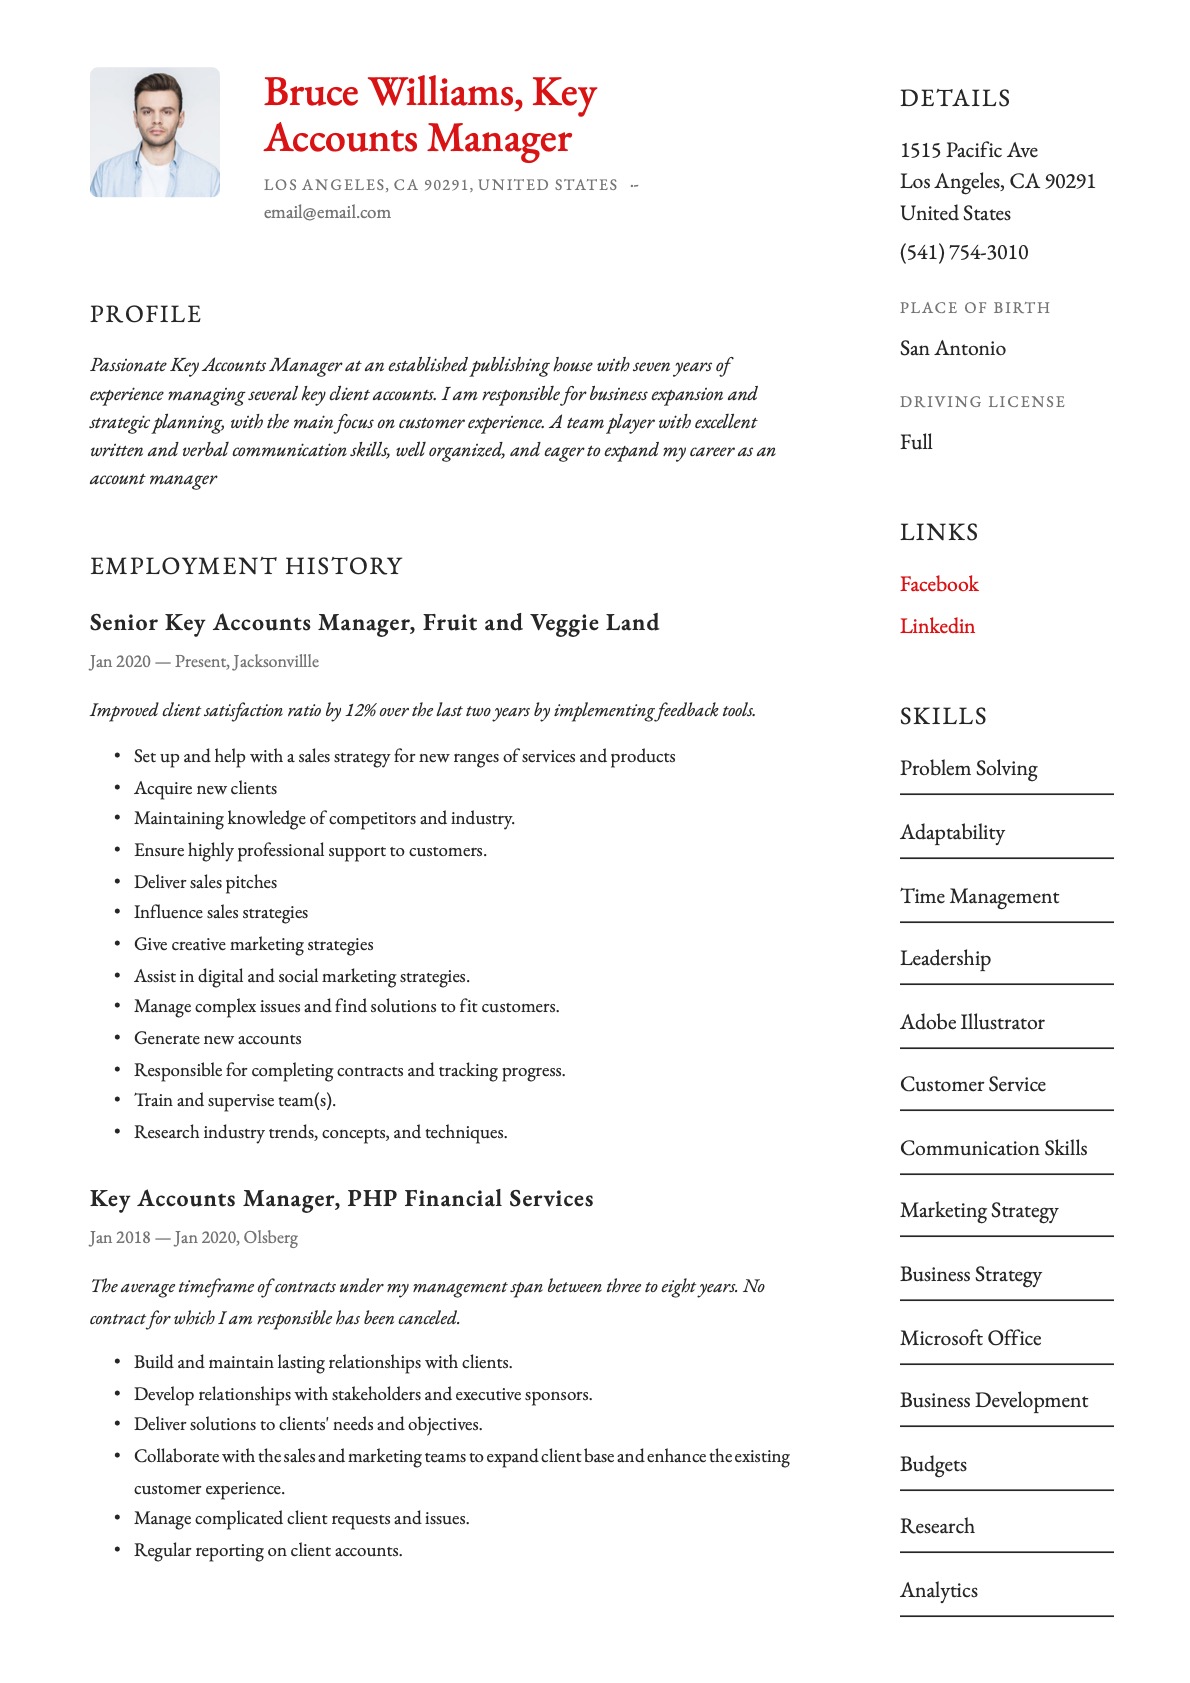 Example resume key accounts manager-13